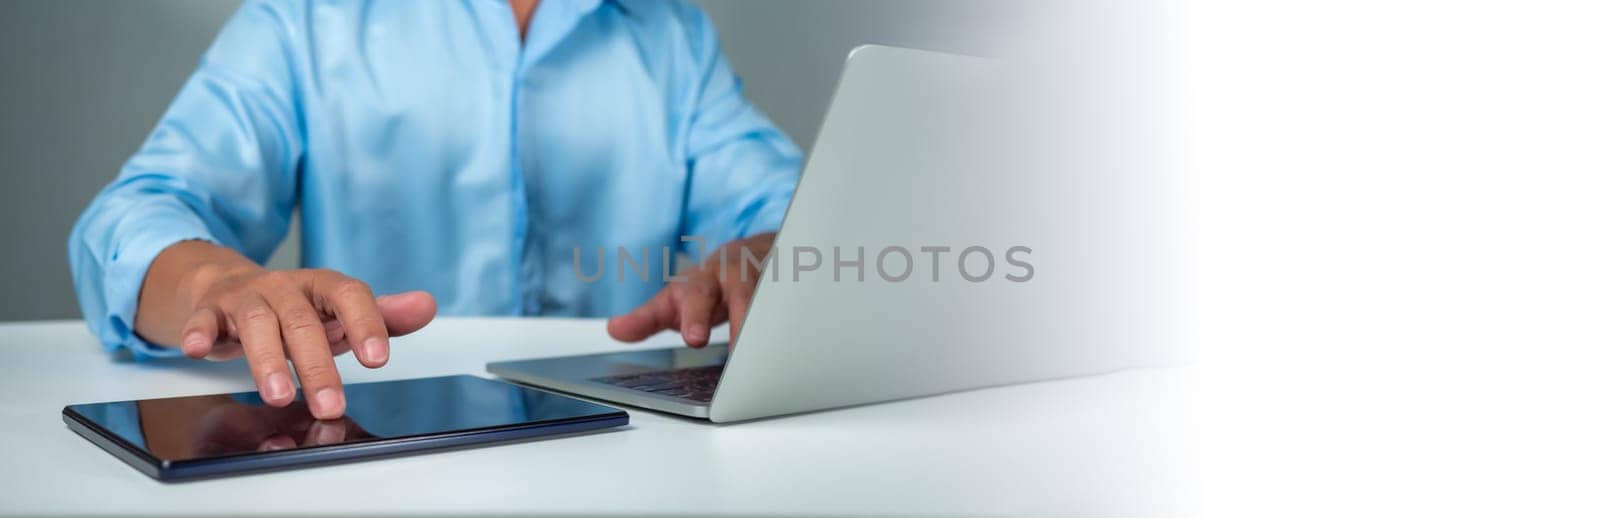 Businessman using tablet to login represents protection concept of cyber security and data security including secure login.